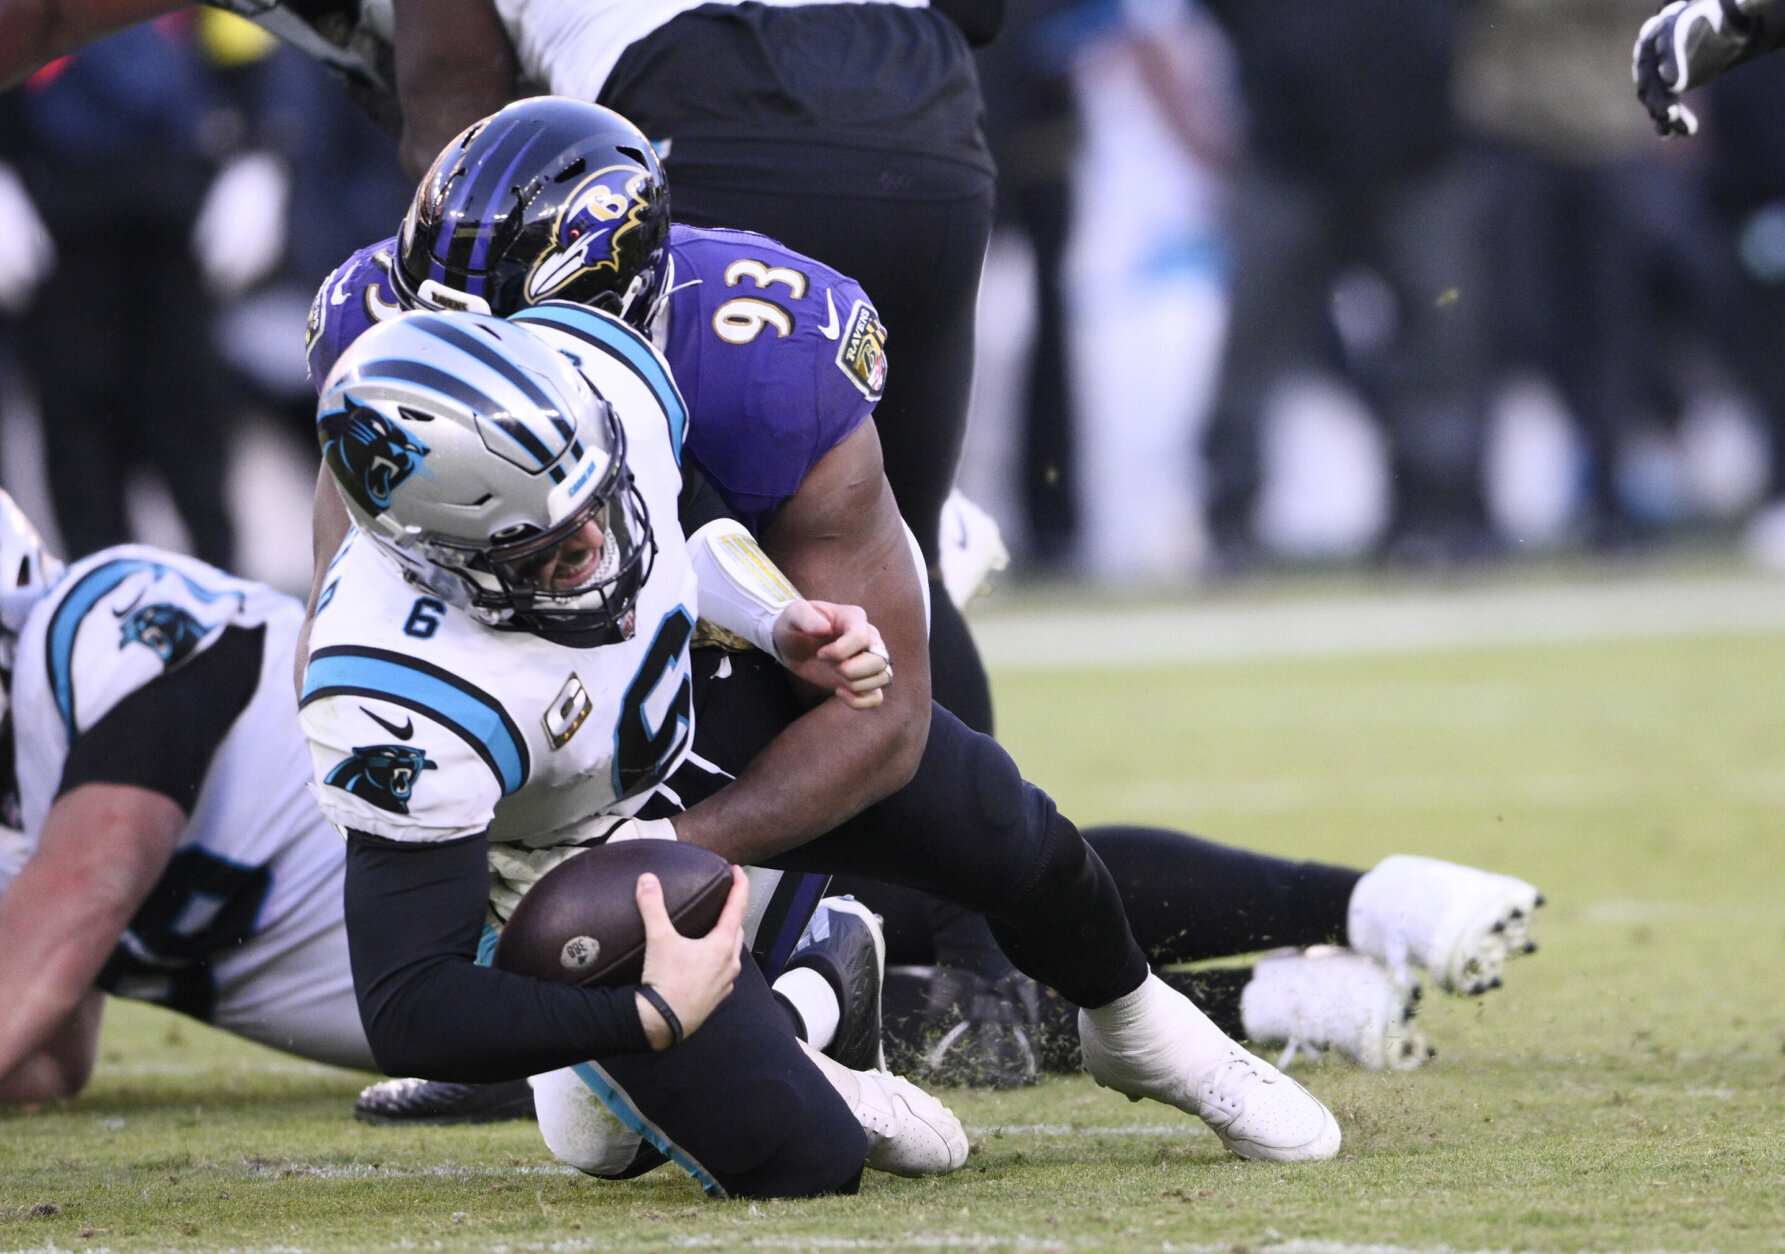 <p><em><strong>Panthers 3</strong></em><br />
<em><strong>Ravens 13</strong></em></p>
<p>Carolina is wholly incapable of making a good decision at quarterback.</p>
<p>Over their previous 51 games, the Panthers are 4-3 with P.J. Walker as their starting quarterback. The loss in Baltimore makes Carolina 9-36 with all other starting quarterbacks. It&#8217;s time to borrow a page from their former coach in Washington: If there&#8217;s no hot hand at QB, stick with the one with the better mojo.</p>
